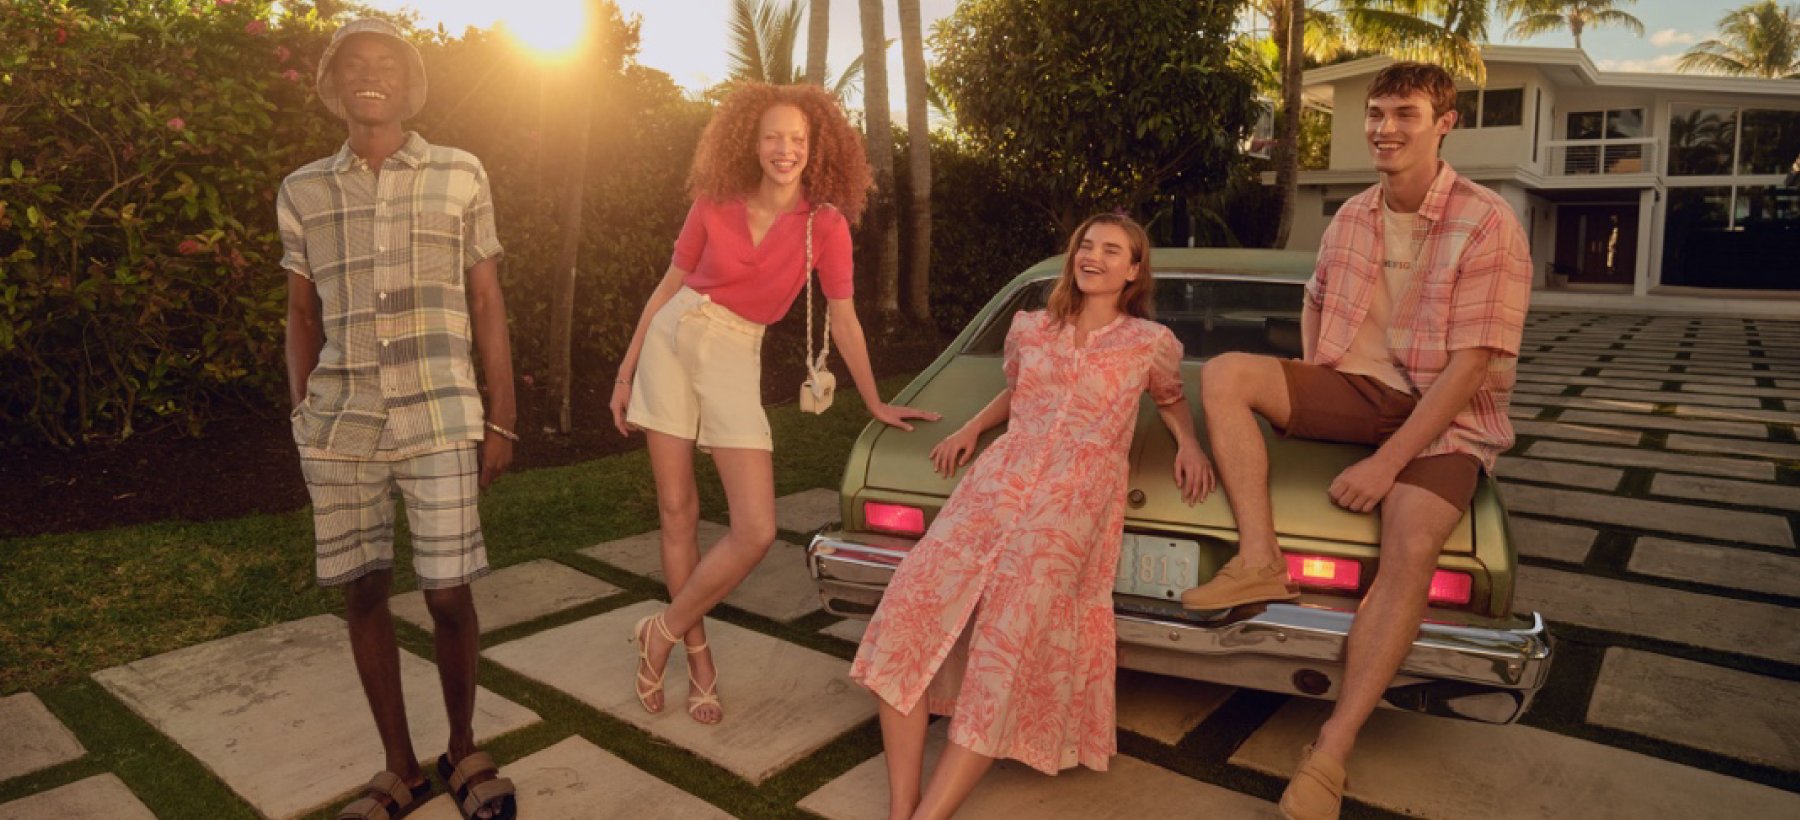 Two Men and Two Women Modelling Tommy Hilfiger Fashion in a Front Yard